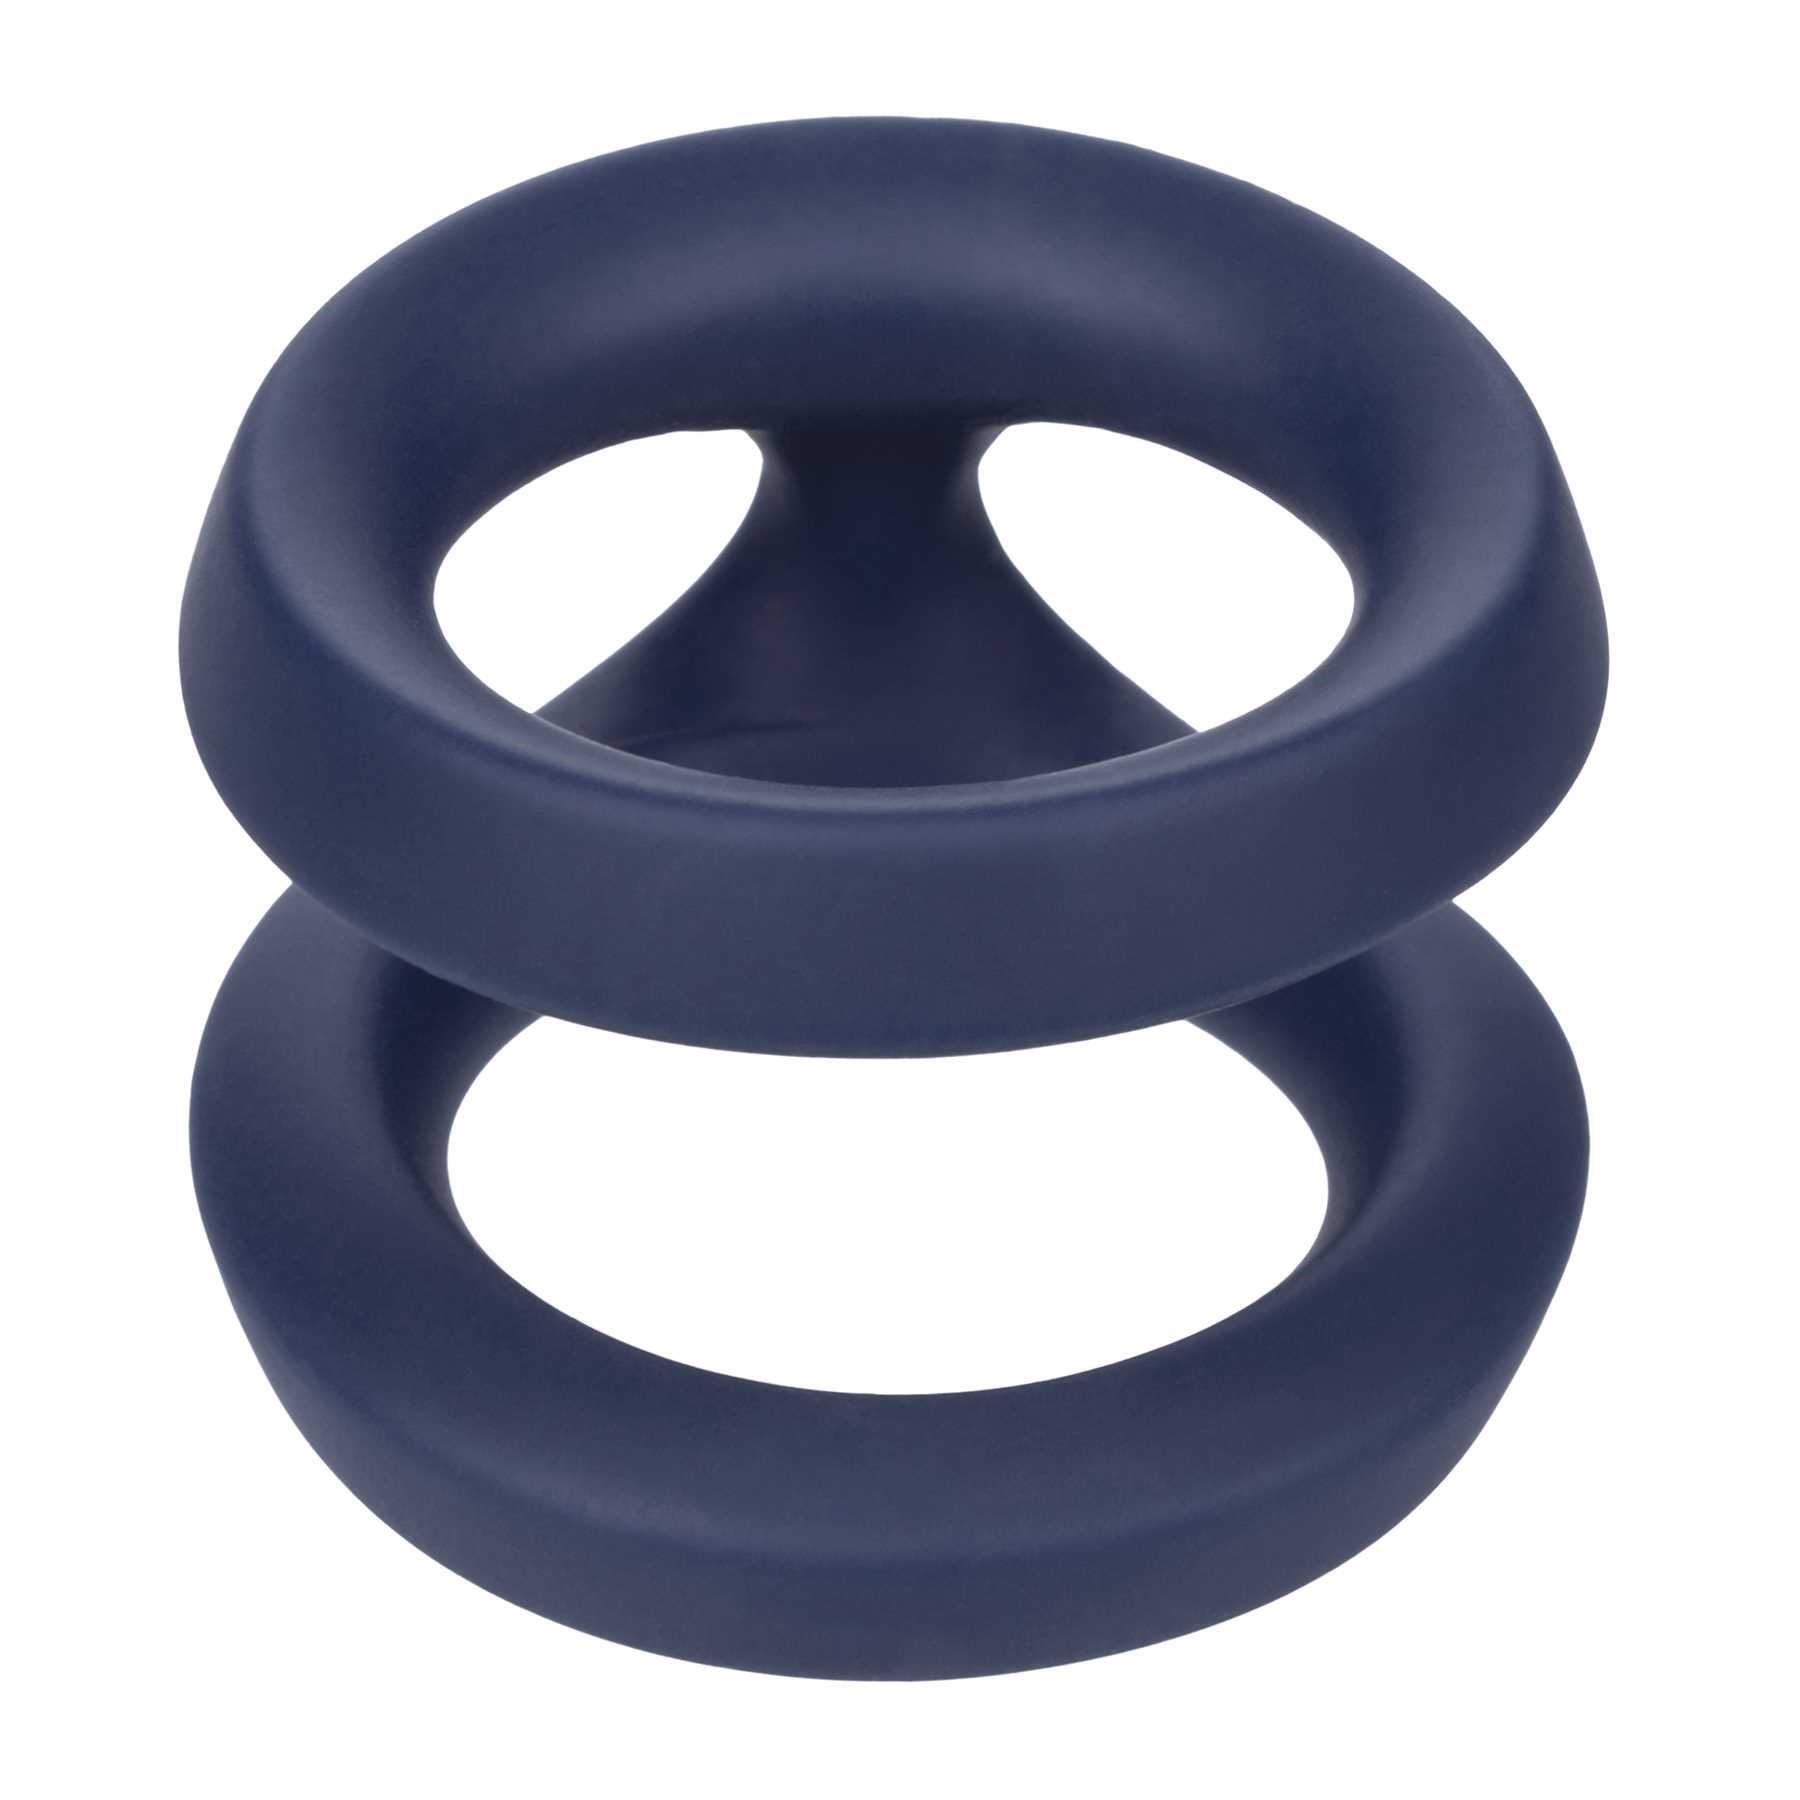 Viceroy Dual Ring product image 1